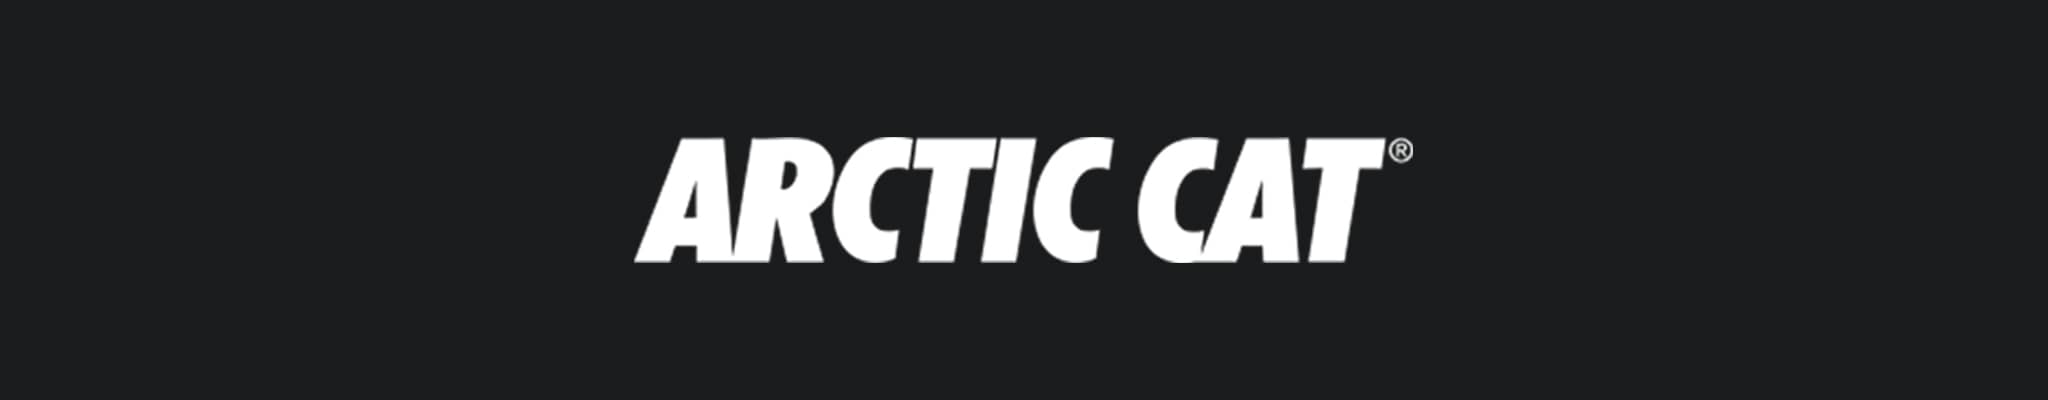 The words 'ARCTIC CAT' in white on a black background, featured on the Perfex website.